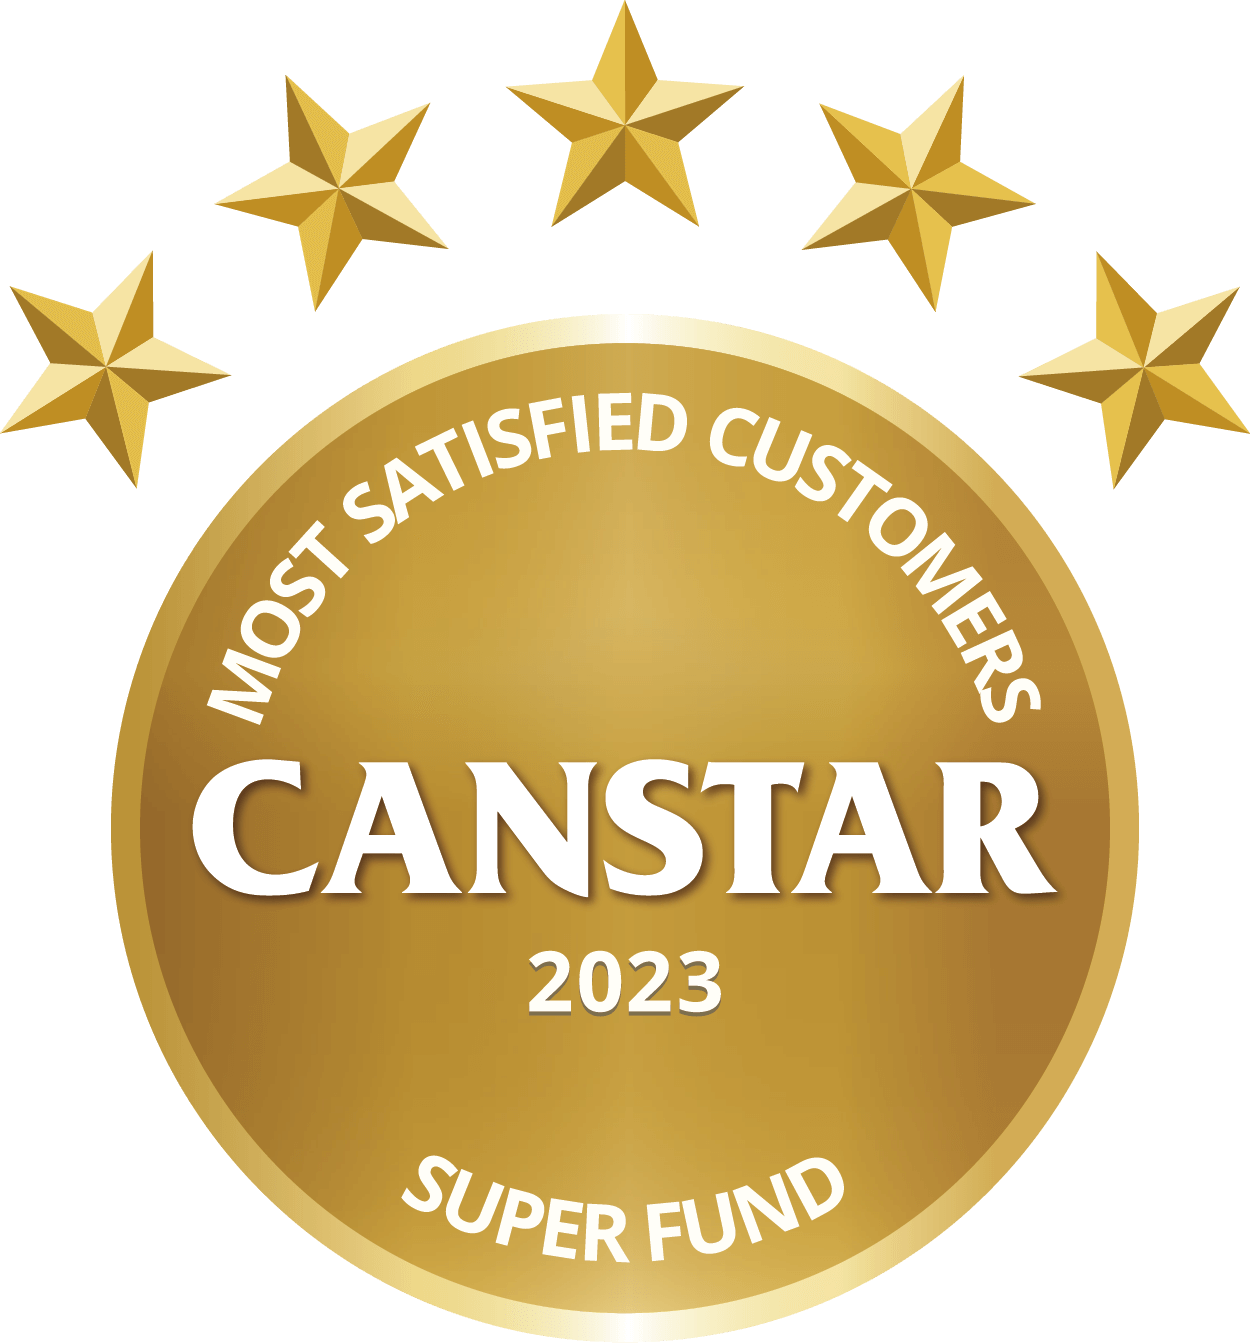 Canstar 2023 Most Satisfied Customers Super Fund Award